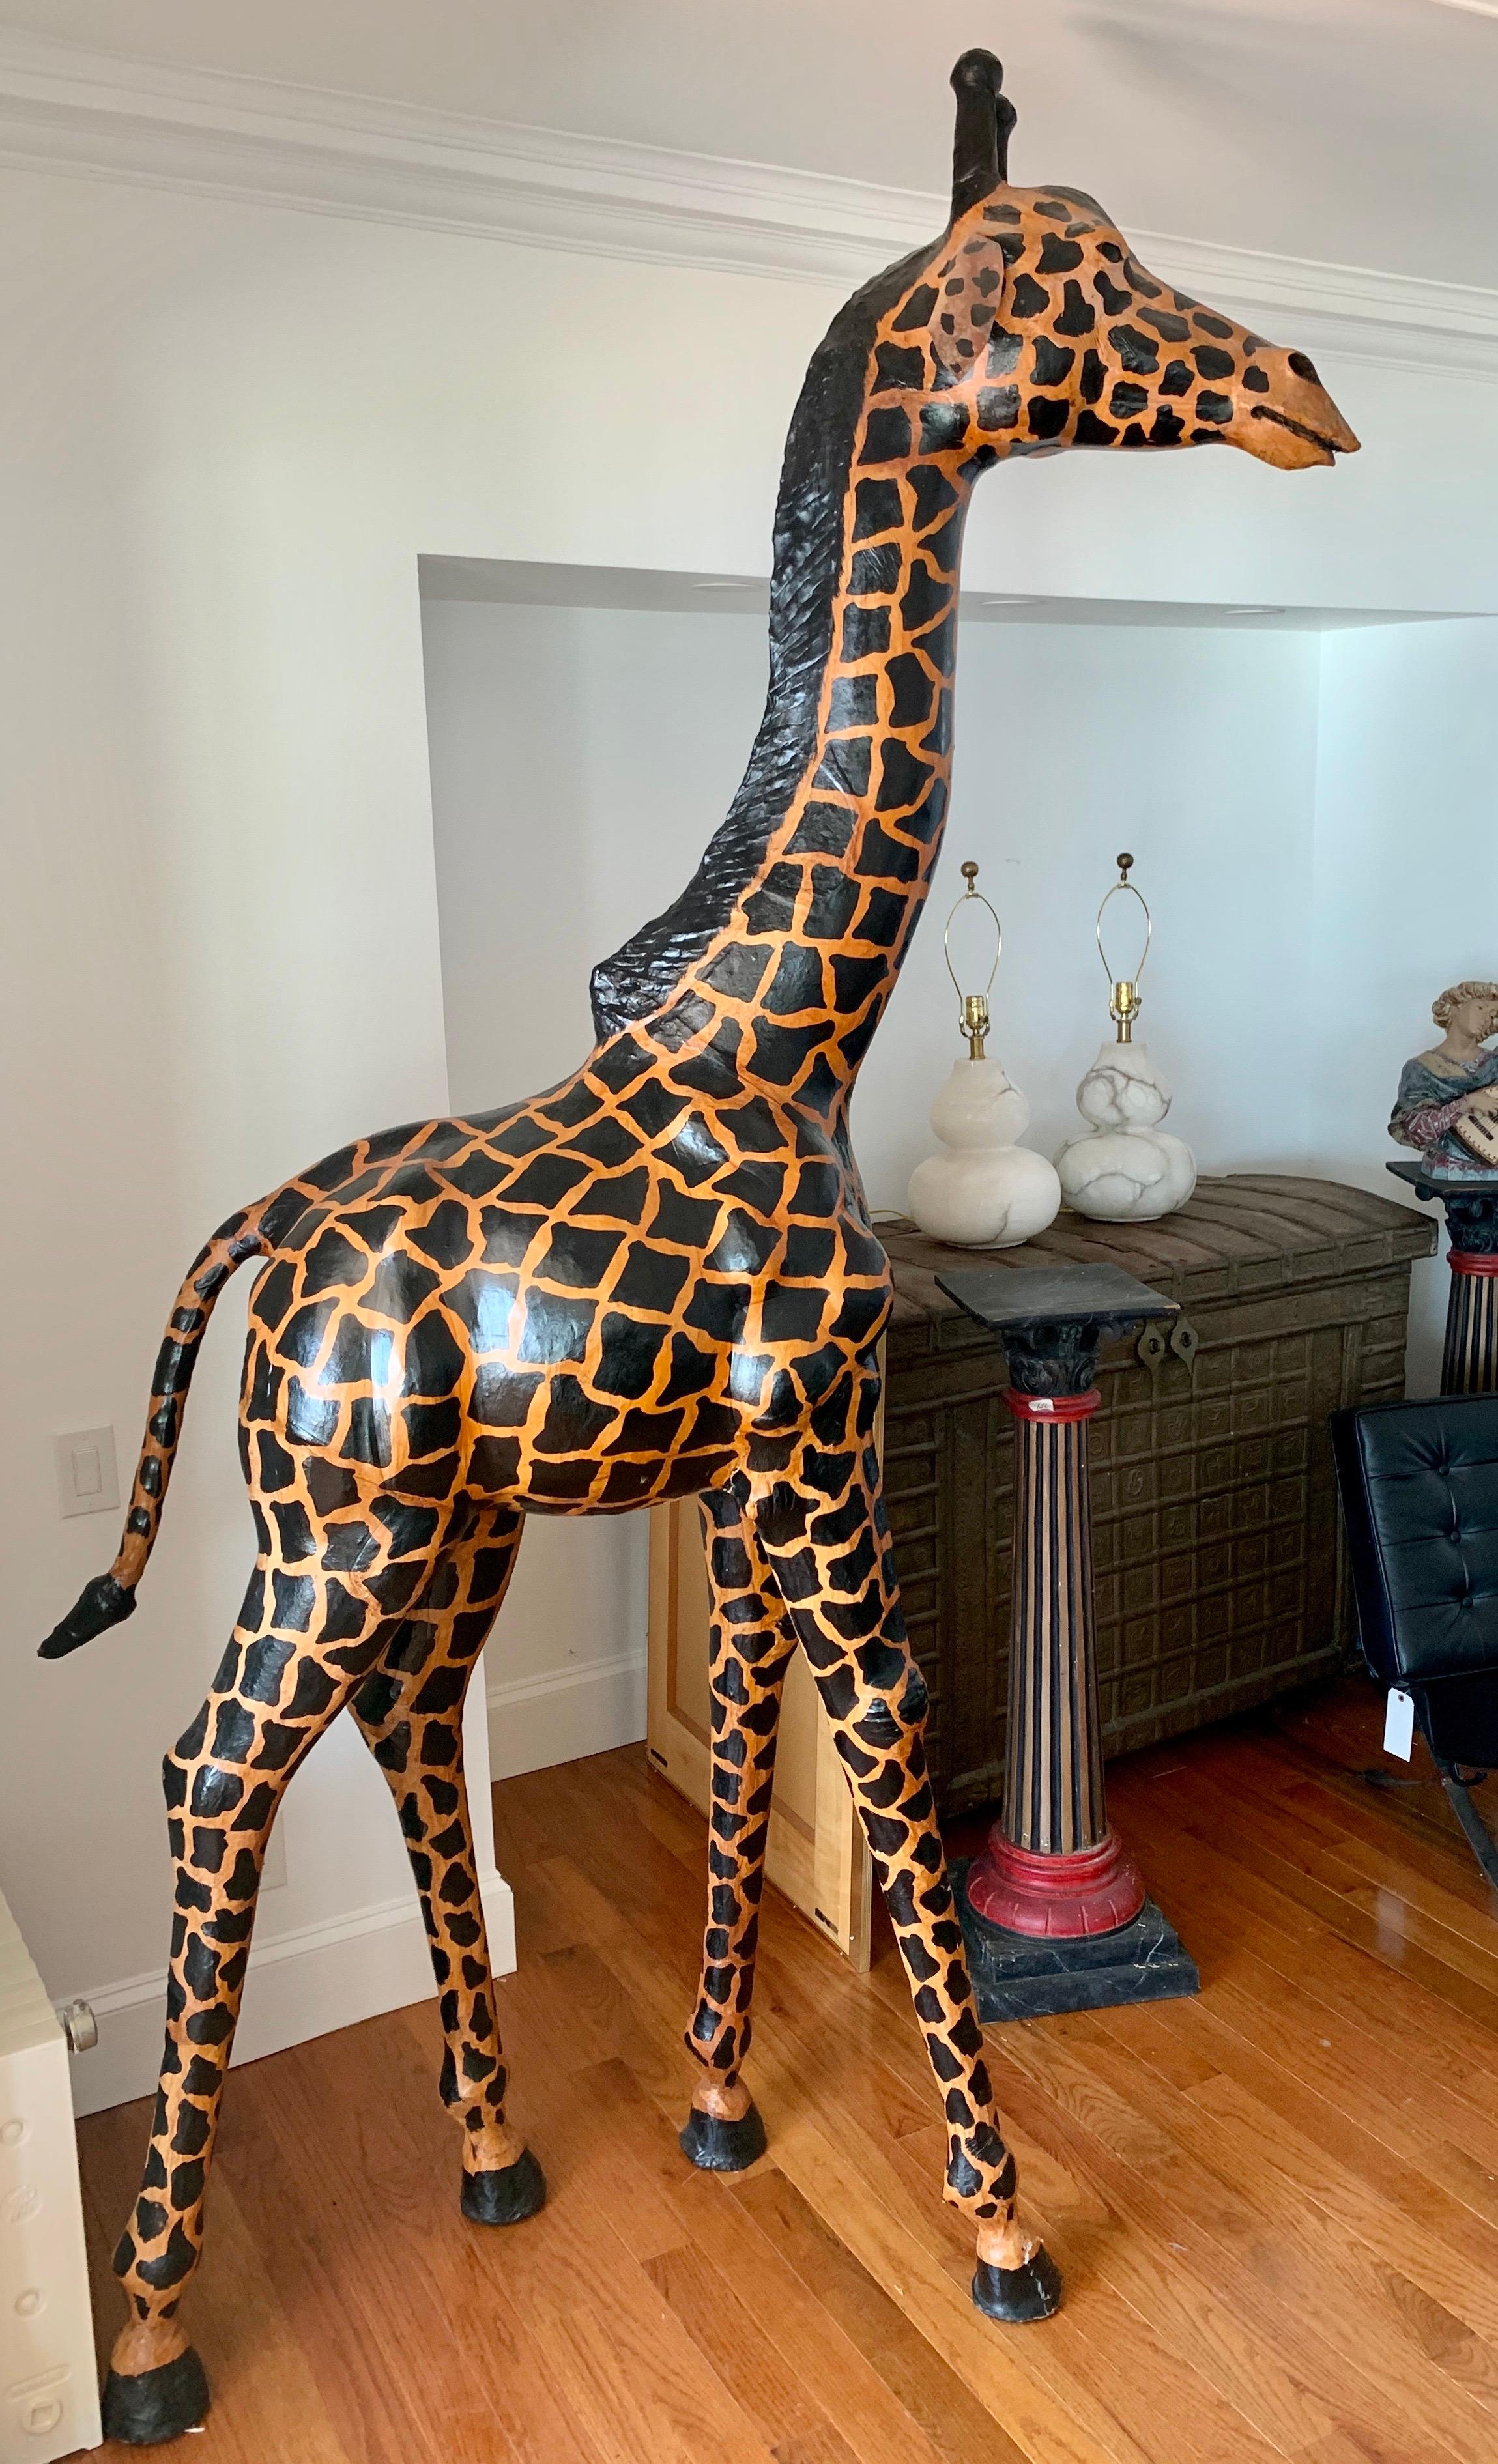 Large Life-Size Leather Giraffe Sculpture Almost Nine Feet Tall 3